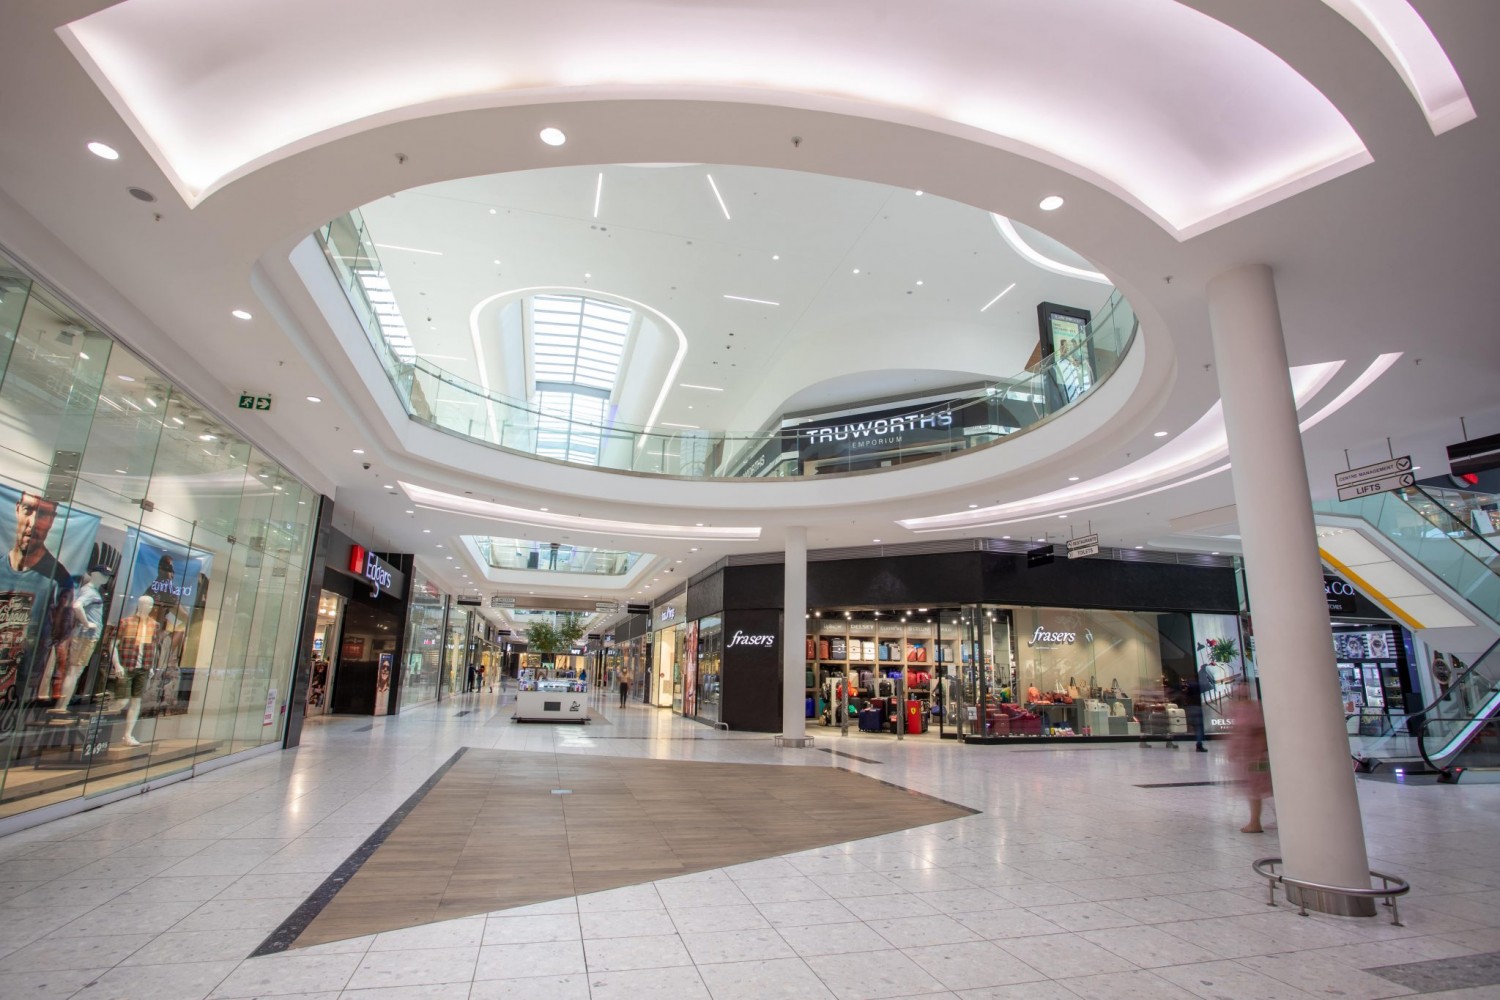 Competition Commission SA Approved the Sale of Two Biggest Shopping Malls